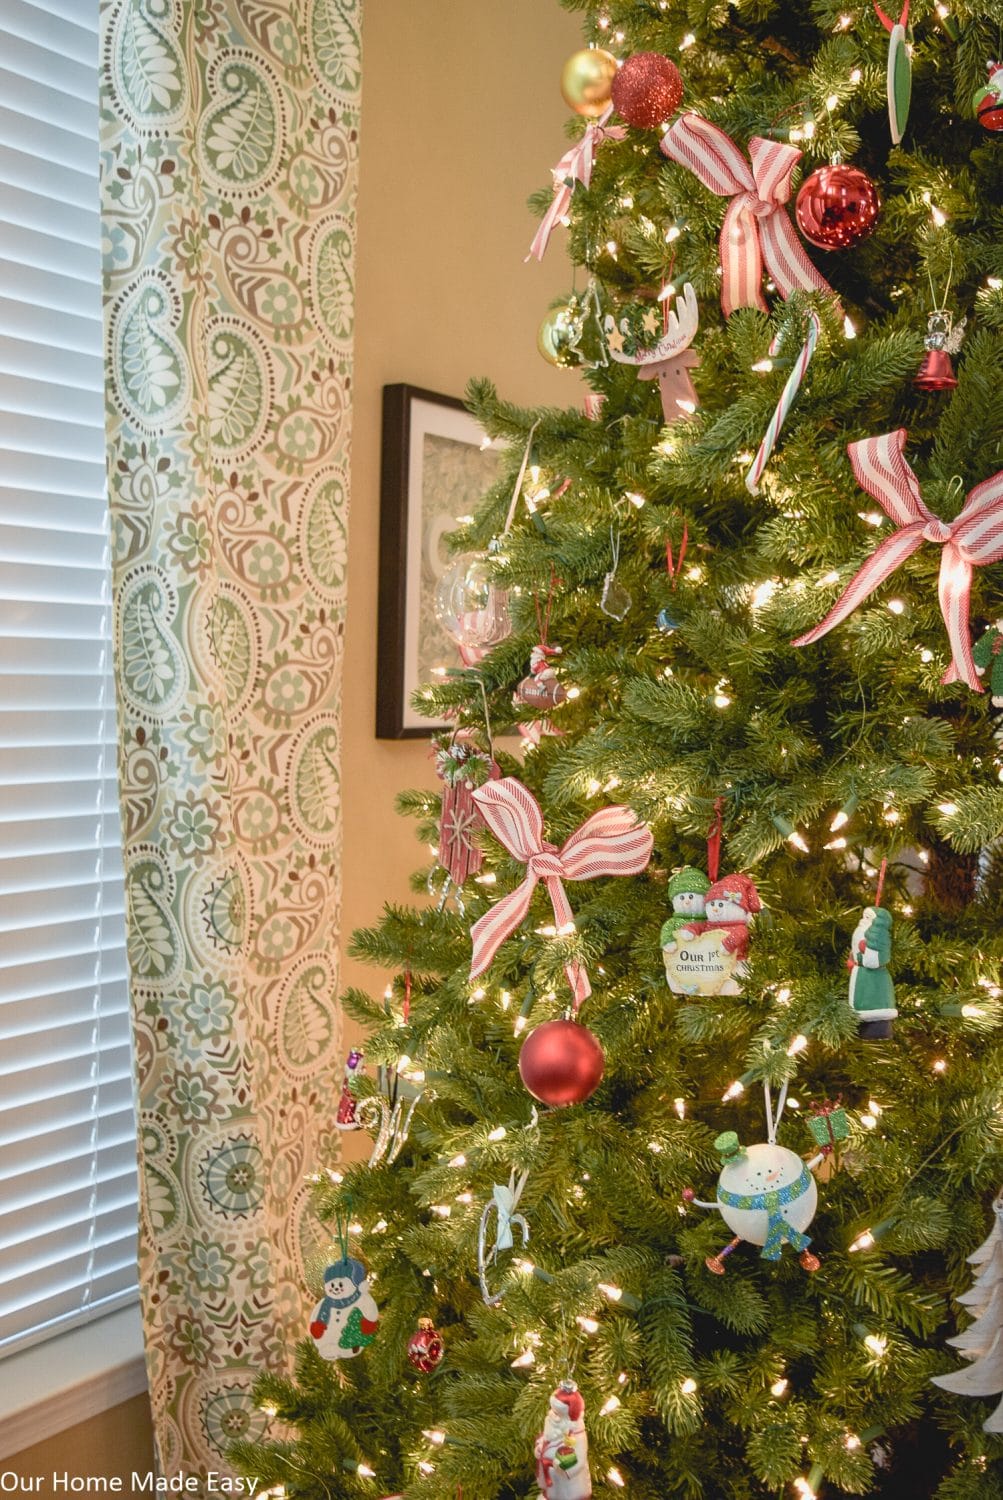 Decorate your Christmas tree with fun deco mesh bows and ribbons